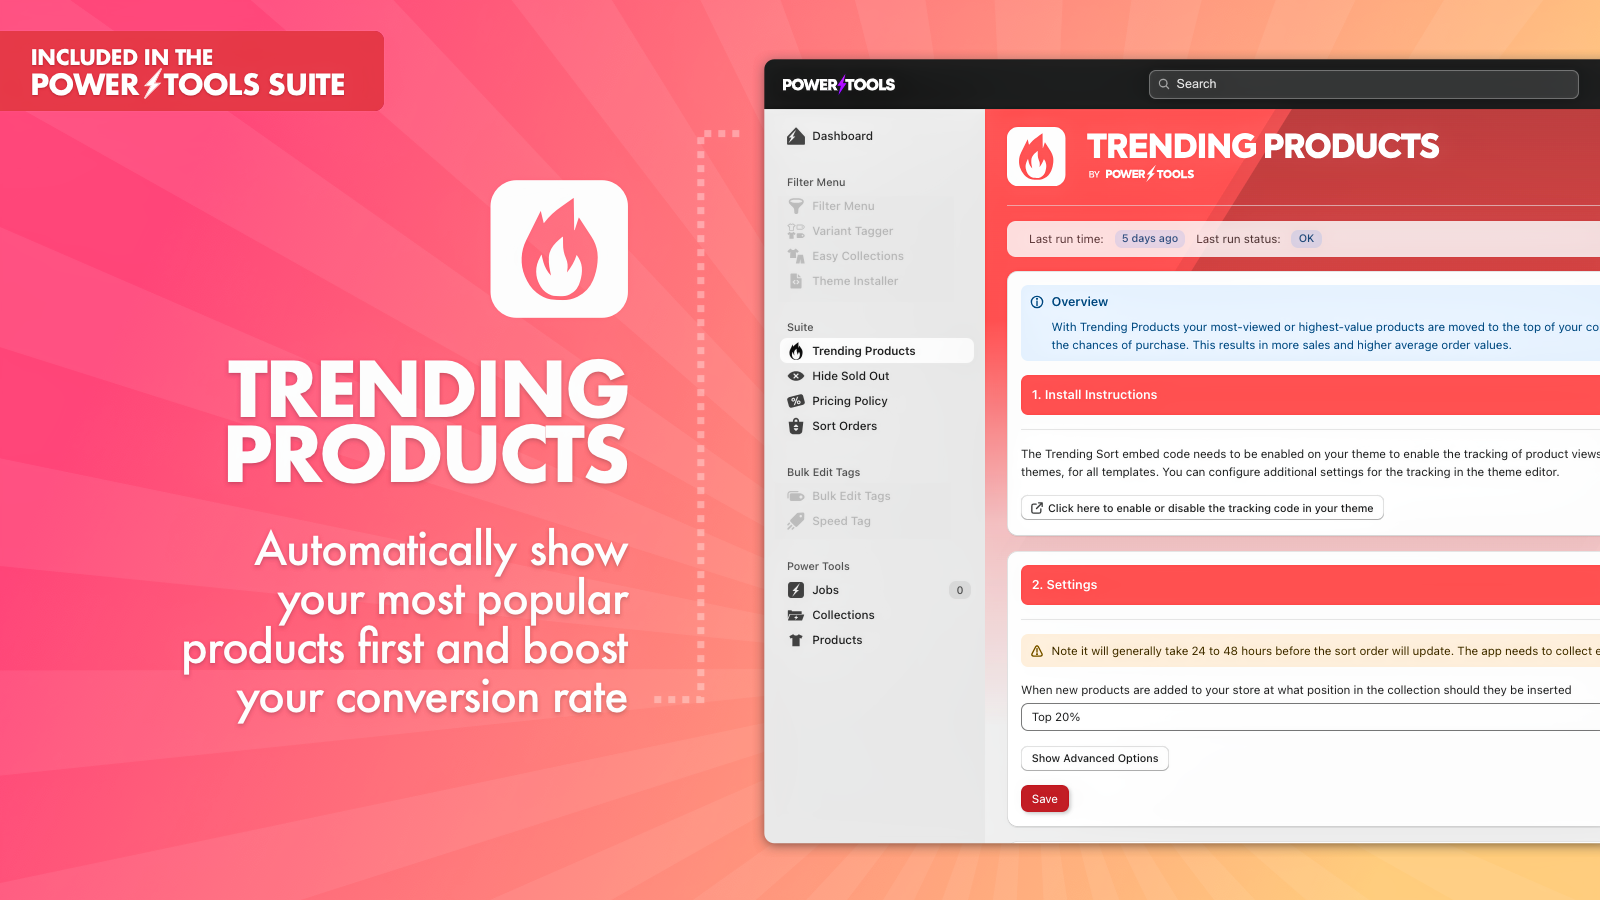 Feature hot products for increased visibility and conversions